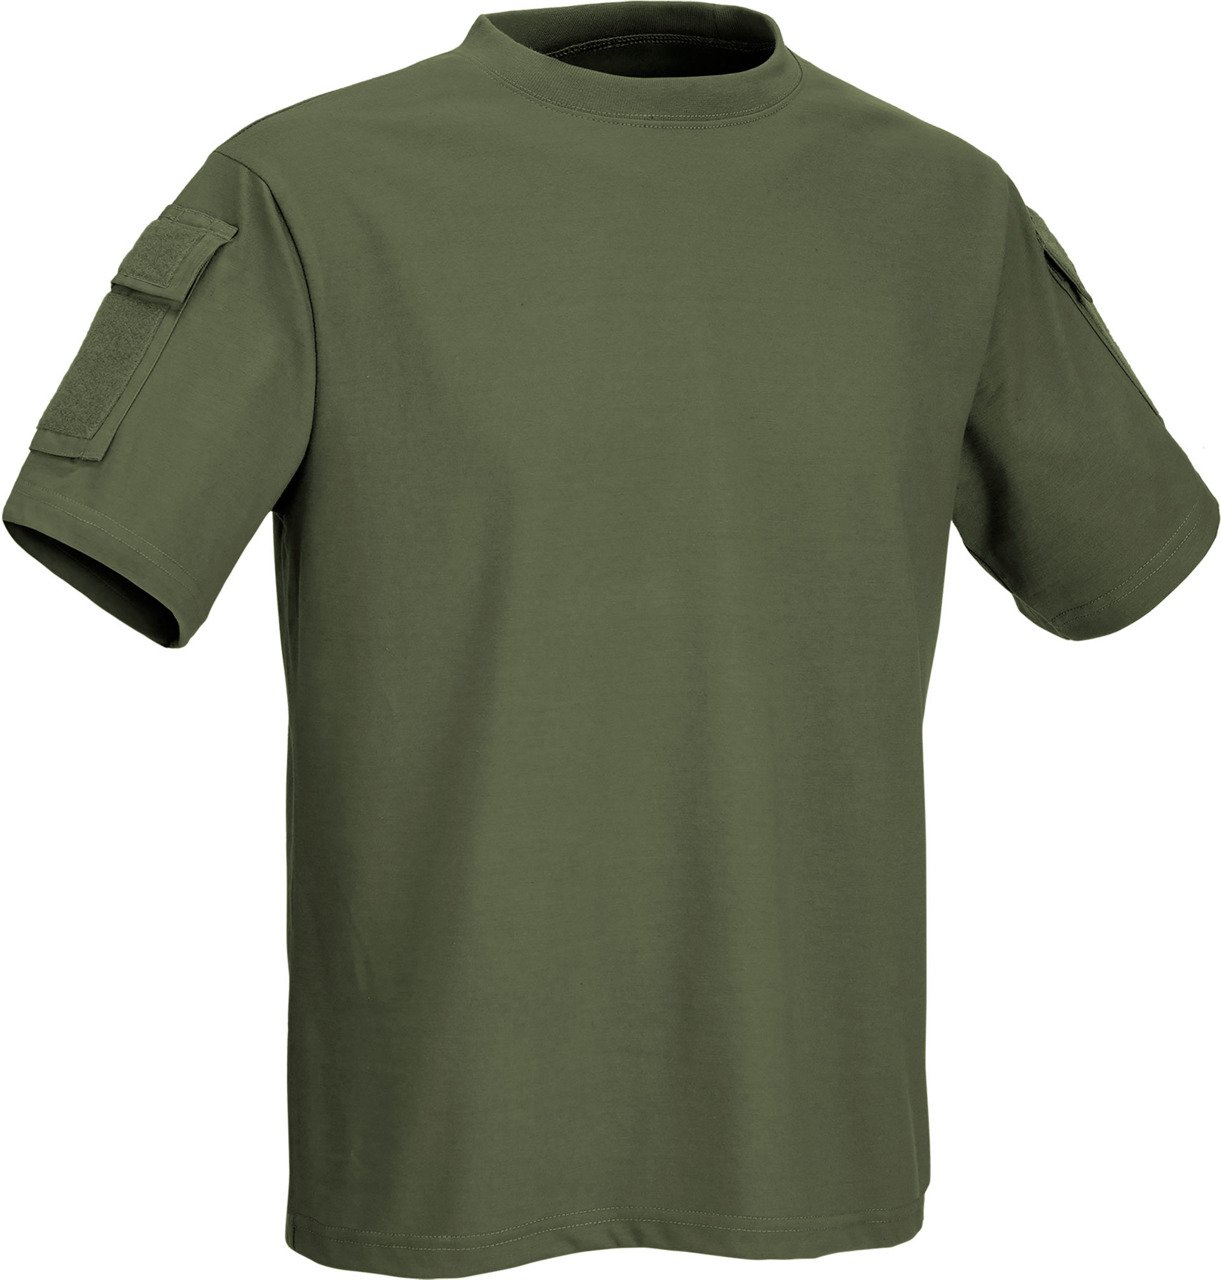 TACTICAL T-SHIRT WITH POCKETS - DEFCON 5® - OD GREEN OD Green | Apparel ...